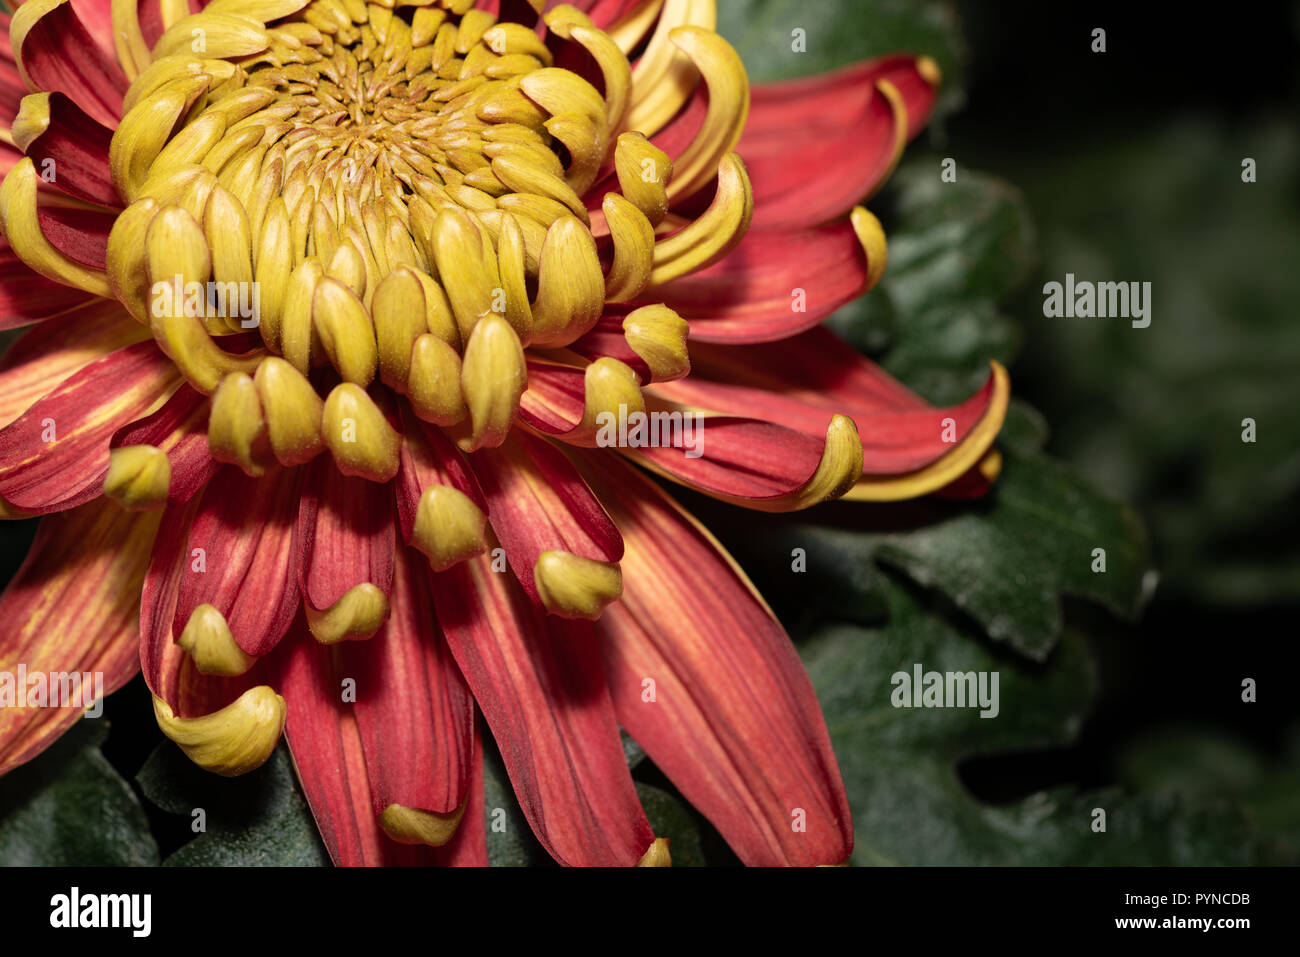 close up of an off center red and yellow incurve chrysanthemum Stock Photo